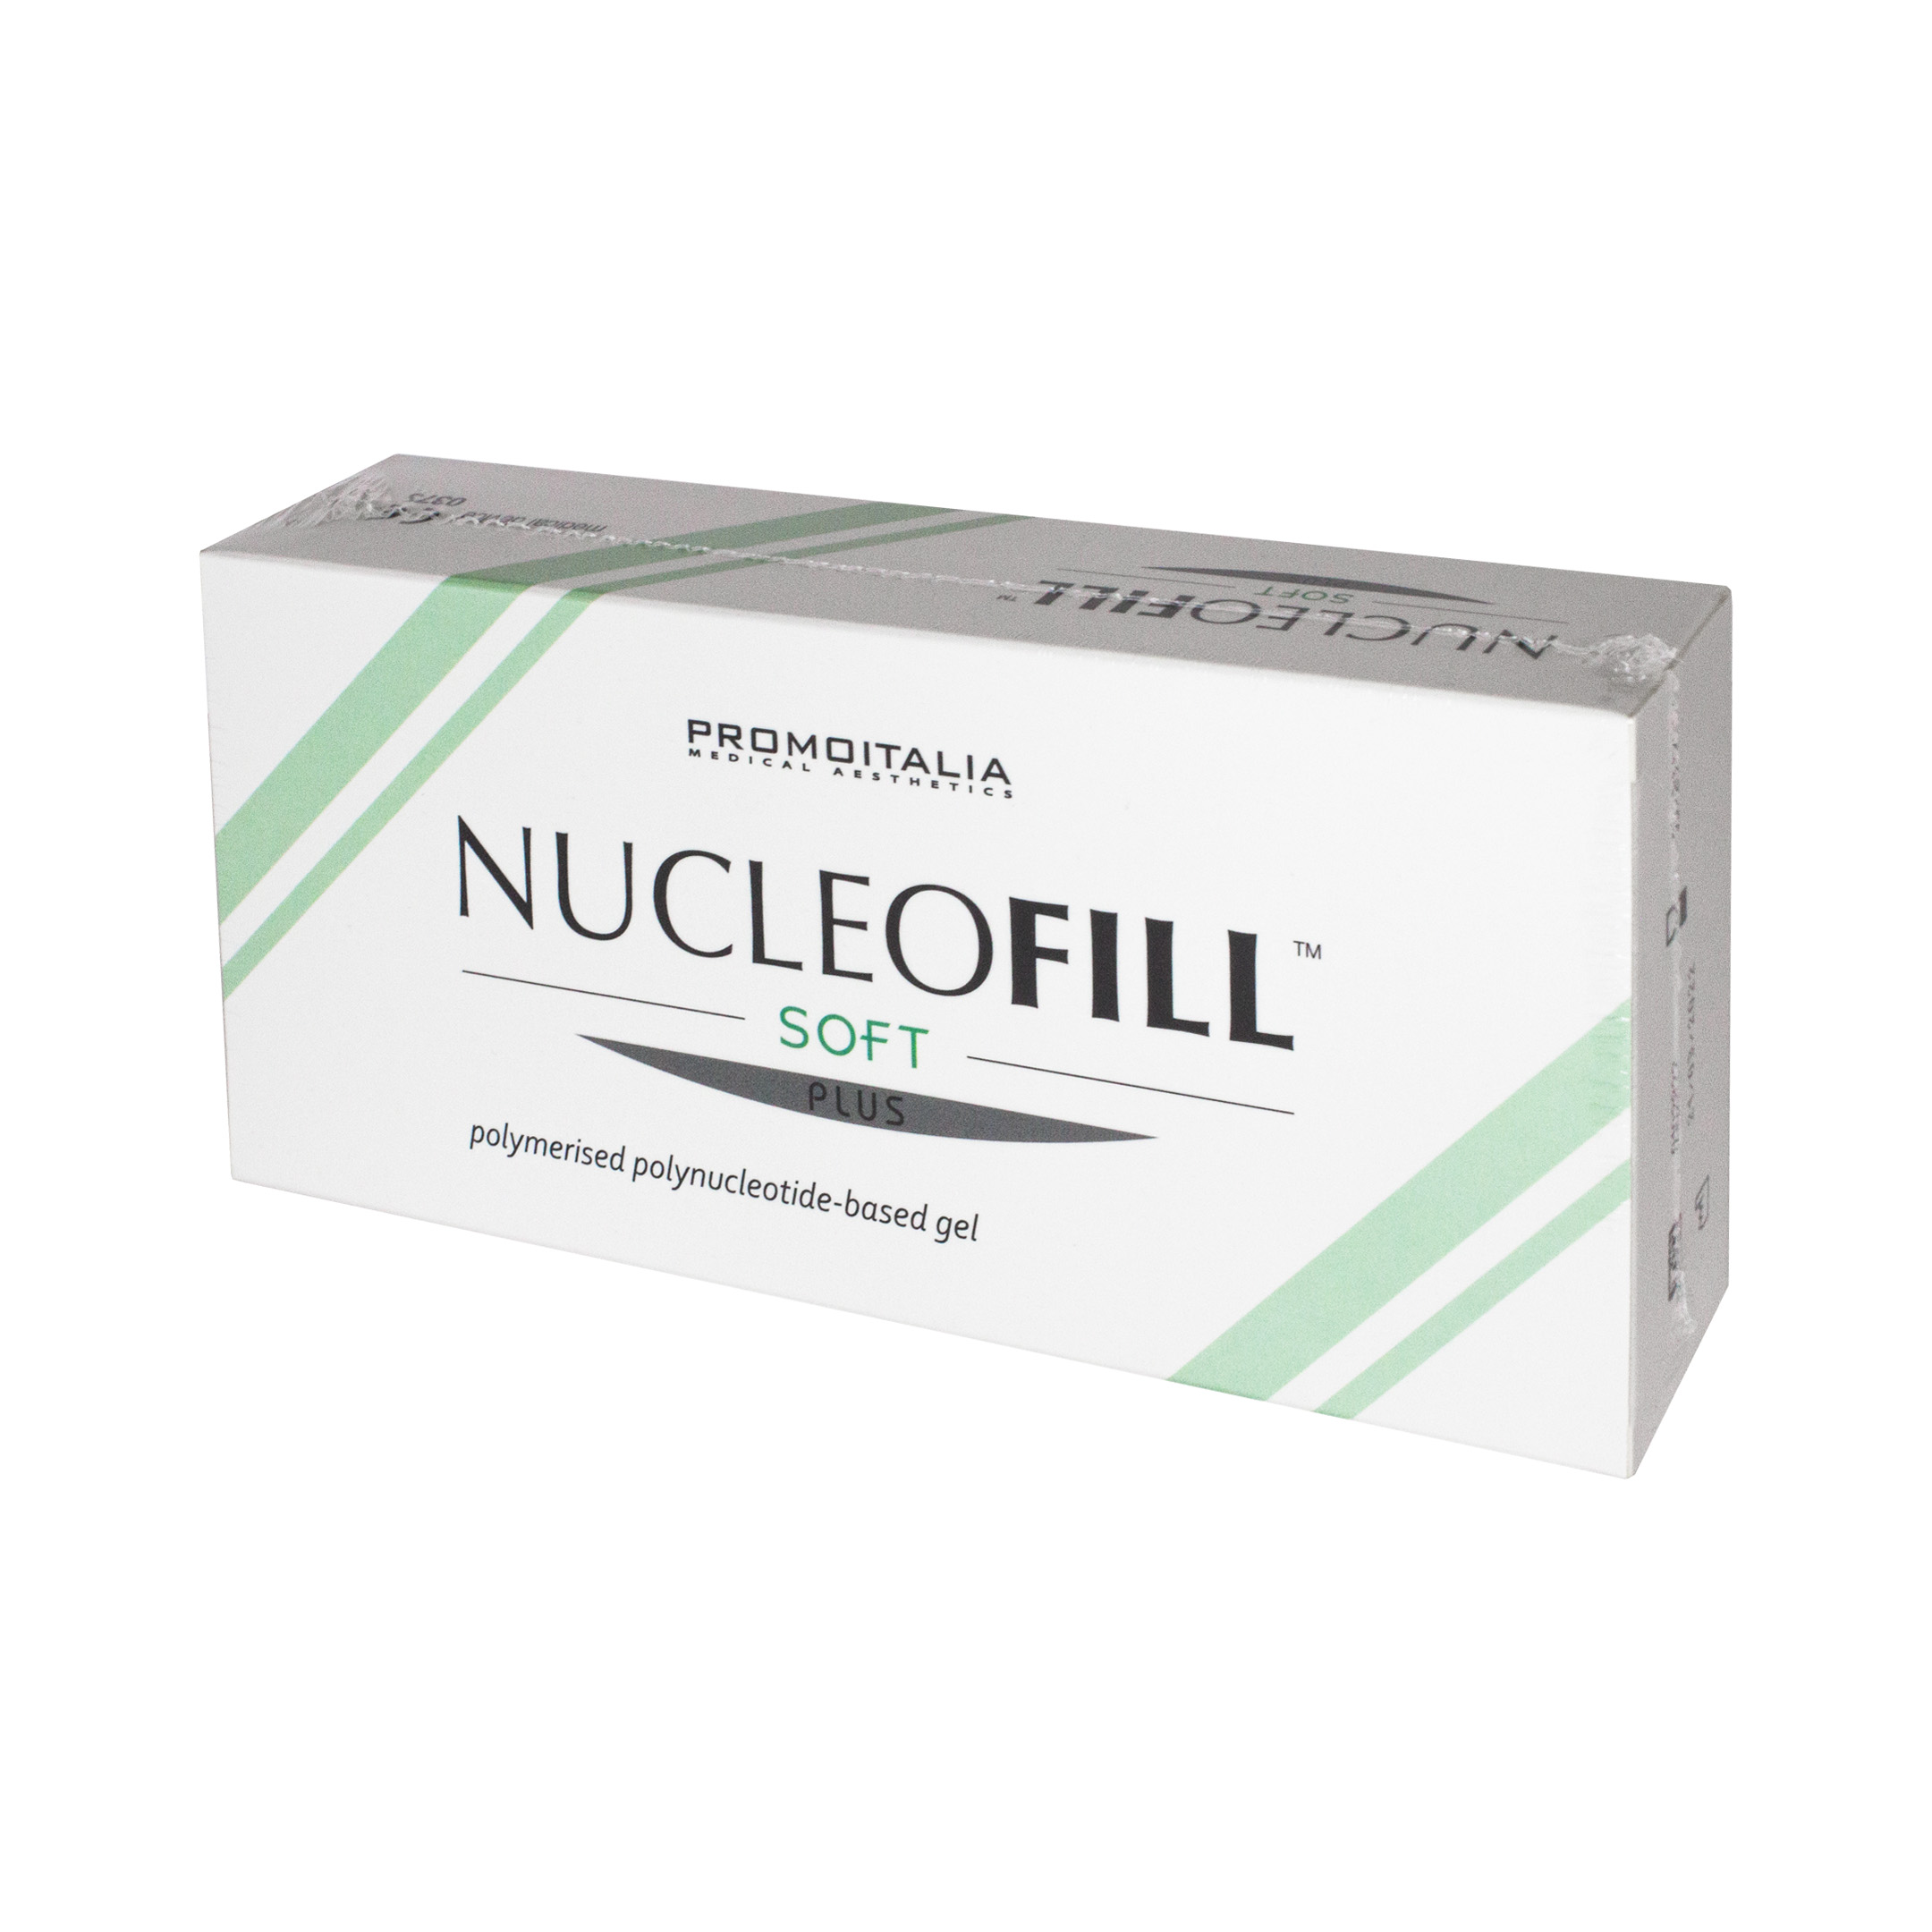 Nucleofill softplus side